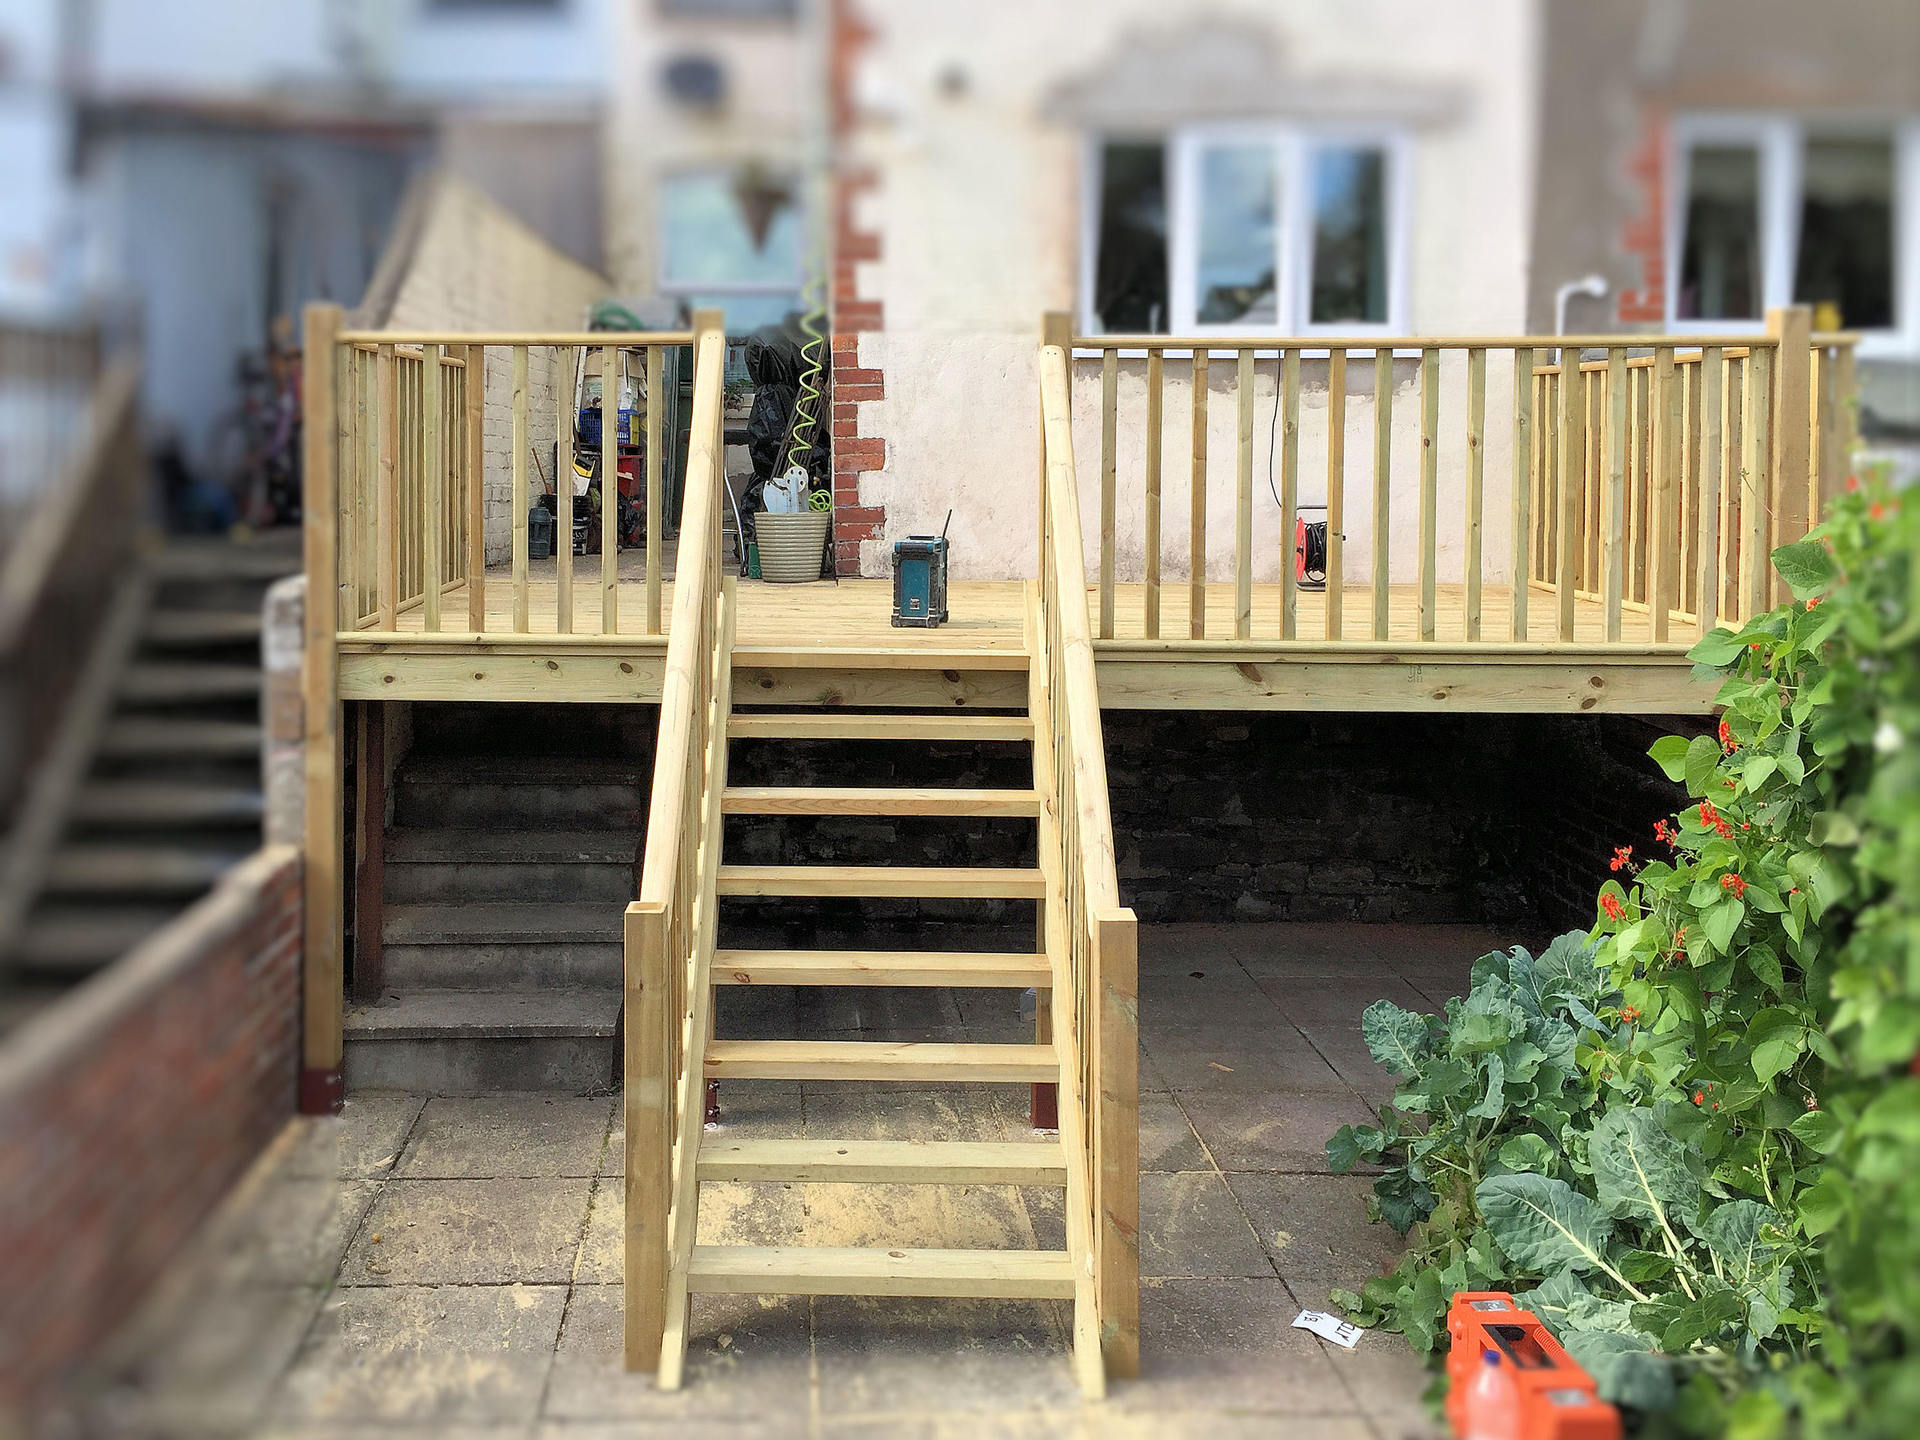 Decking completed, now with useable ground floor patio and staircase leading to garden